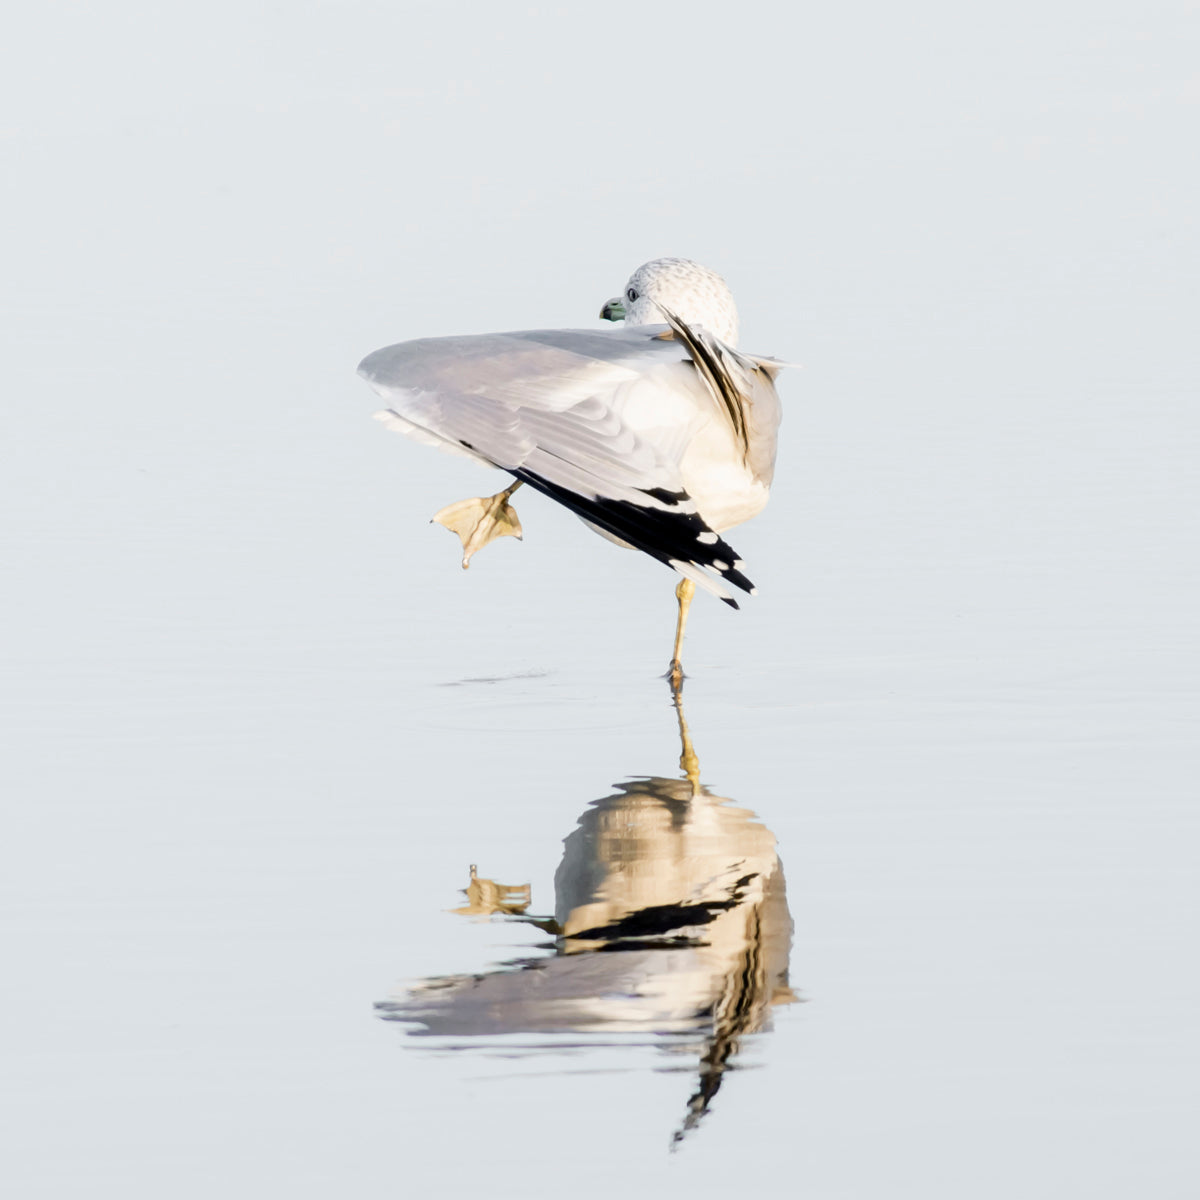 Seagull No 6 - Coastal bird prints by Cattie Coyle Photography